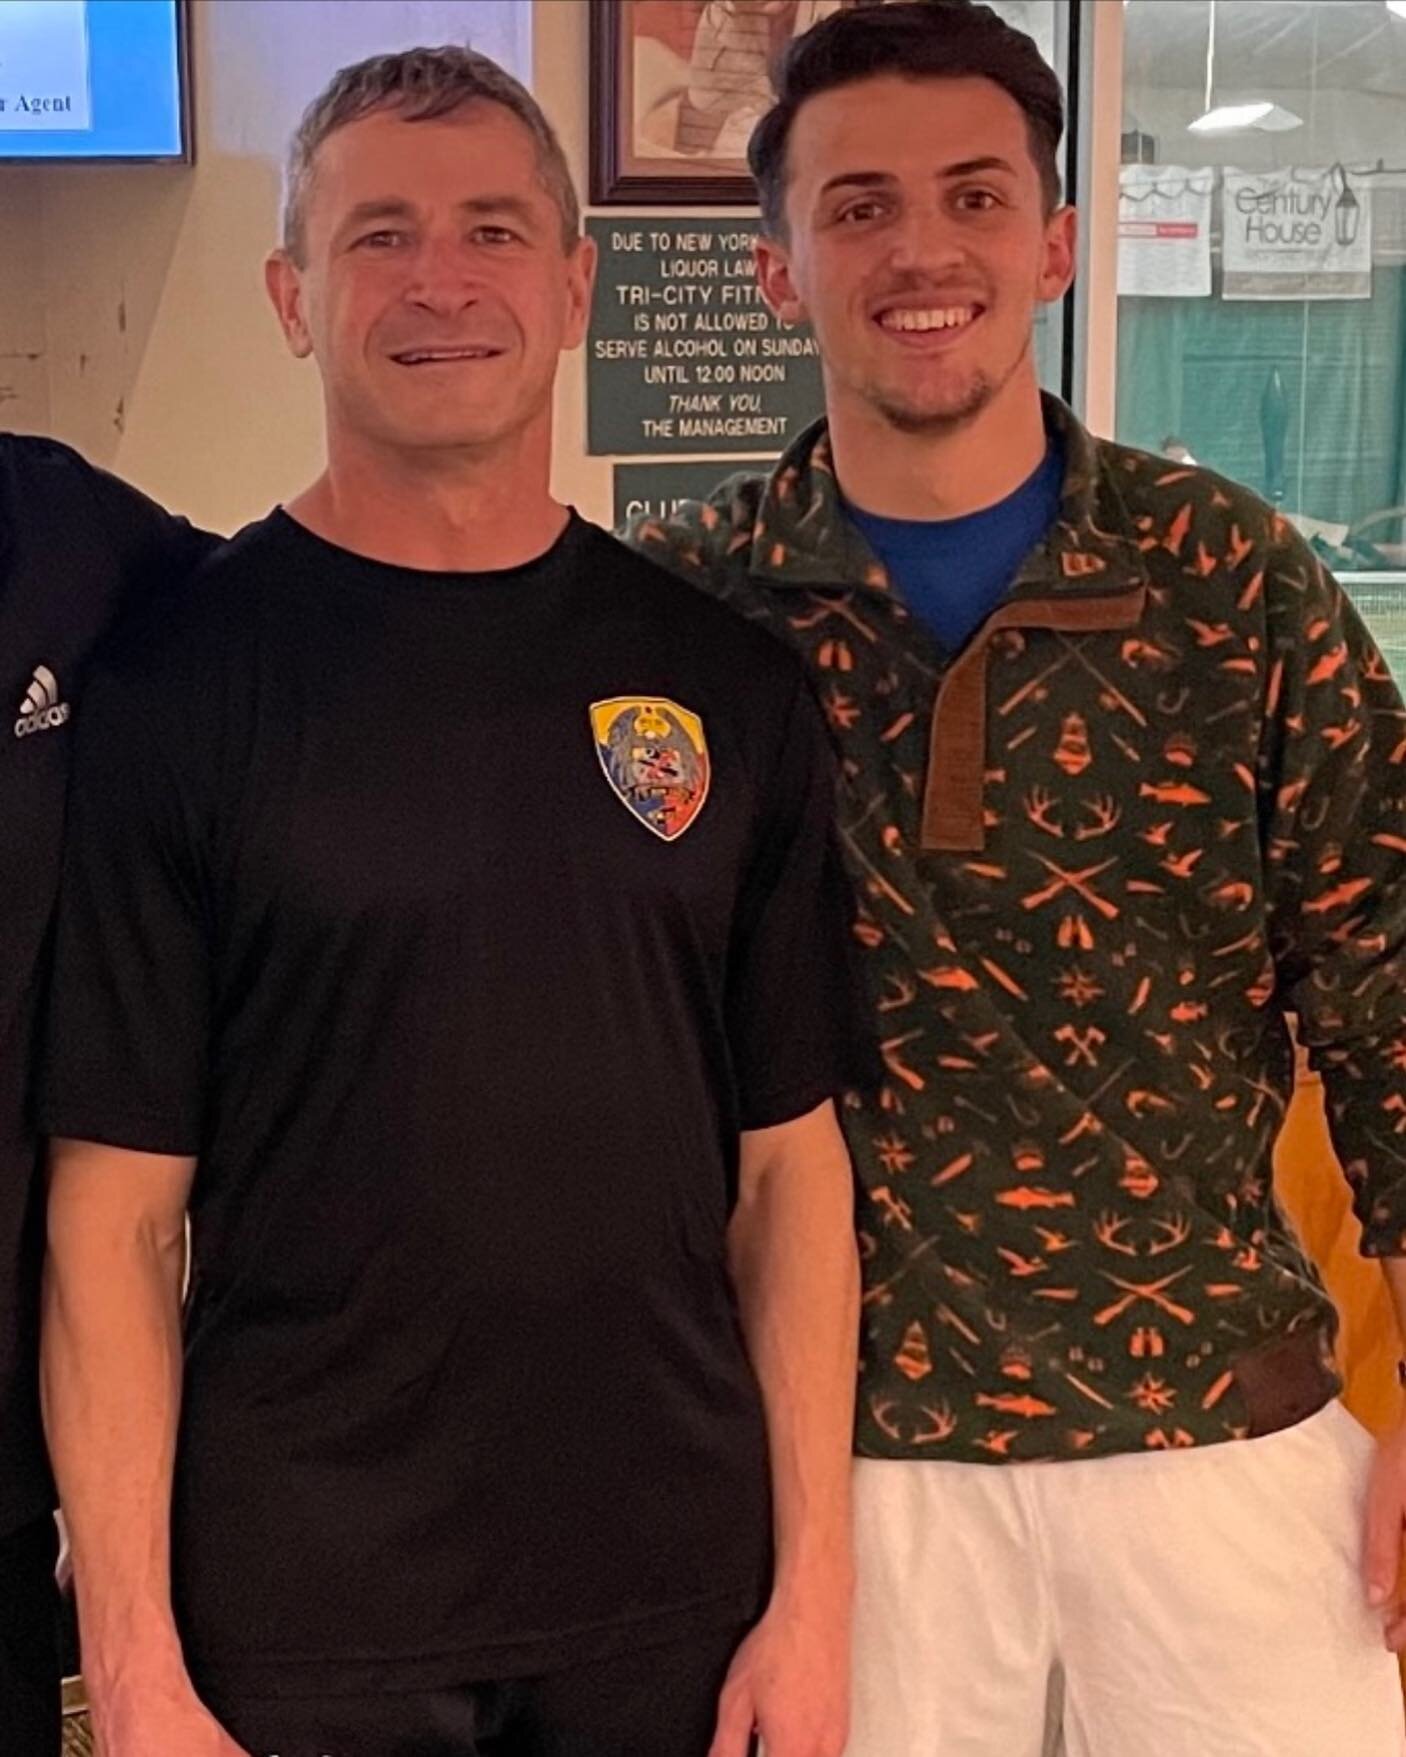 LTC Ferreira and WO1 Lars Olson both helicopter pilots for the New York Army National Guard and members of the Tri City Tennis for the Troops program.  Thank you both for your service. From the staff at Tri-City Fitness